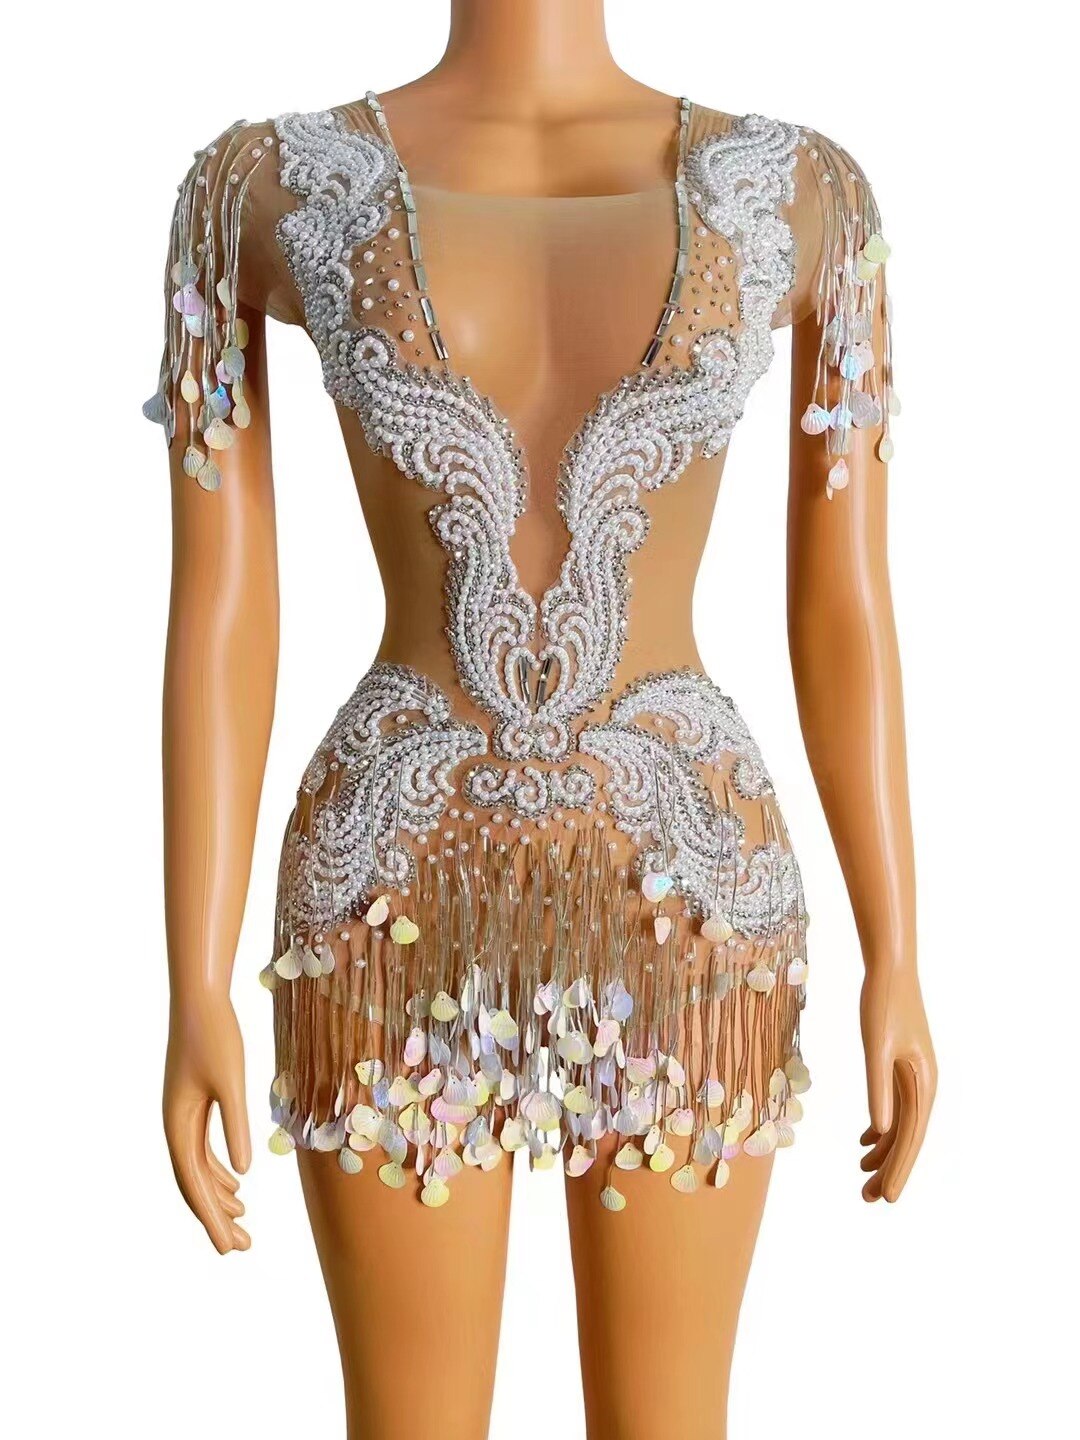 Nightclub Silver Sequins Fringes Pearls Crystals Evening Bodysuit See Through Birthday Party Celebrate Fringes Costume Outfit